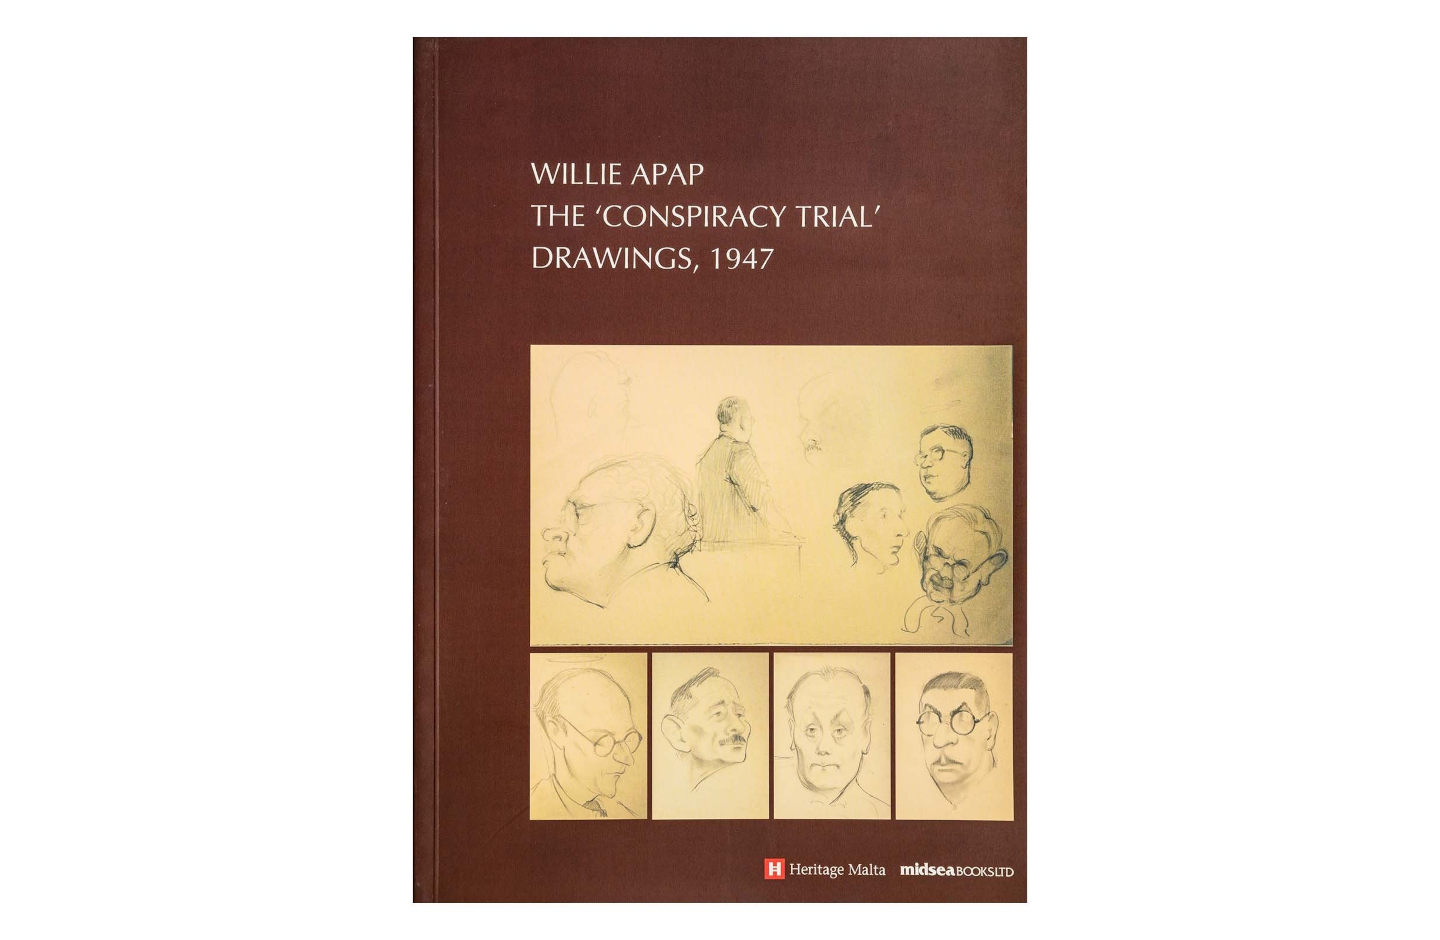 Willie Apap: The ‘Conspiracy Trial’ Drawings, 1947